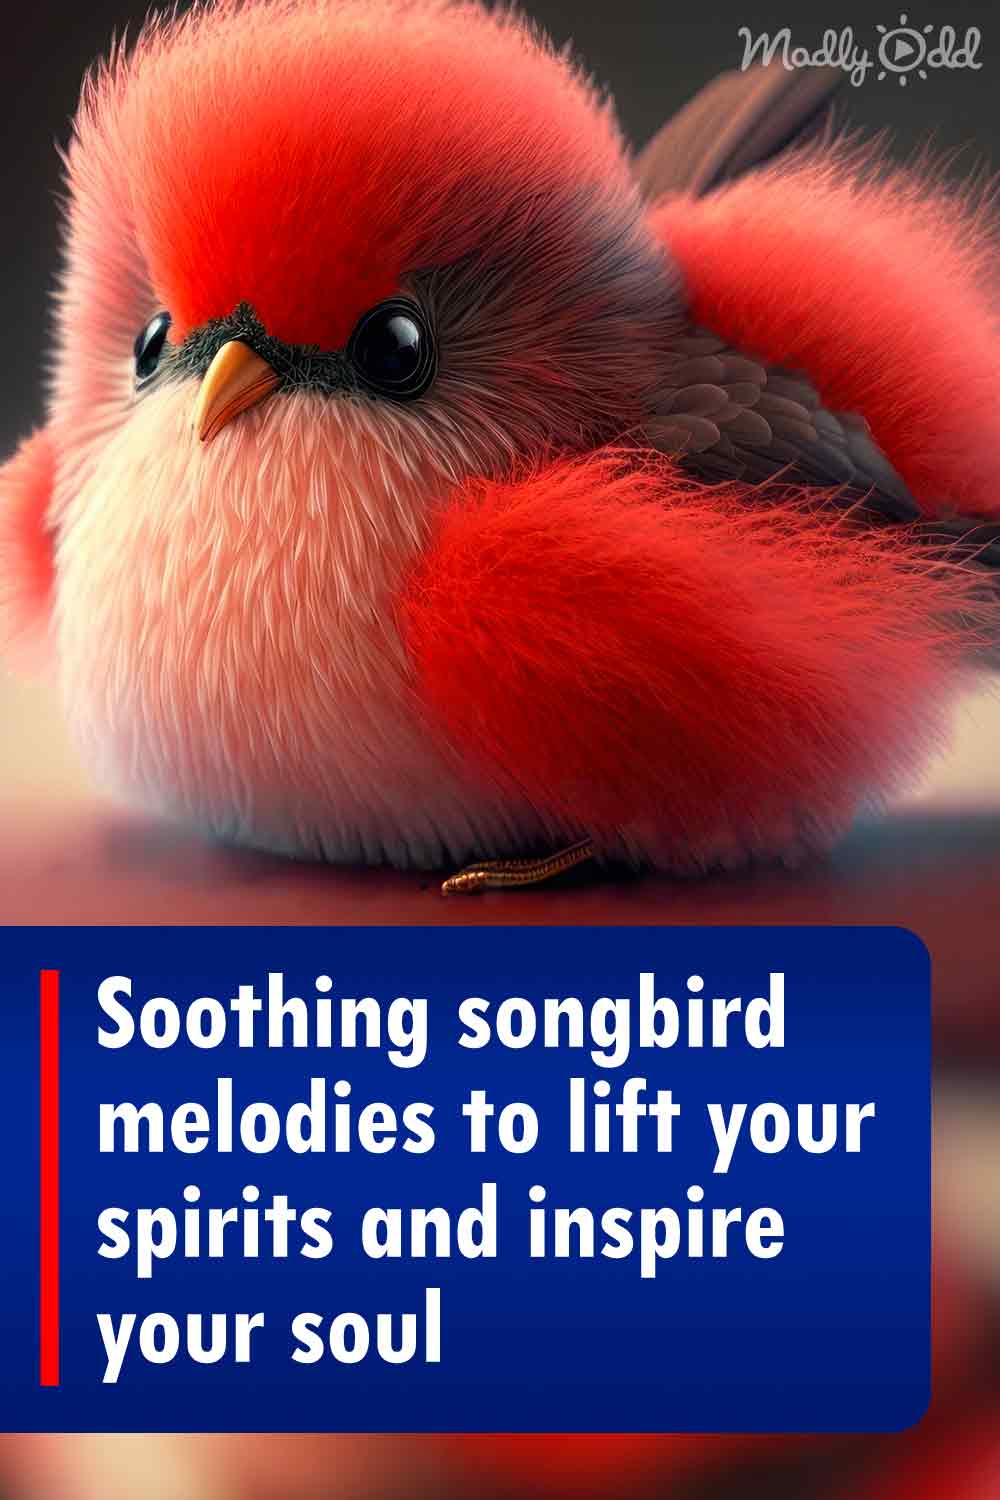 Soothing songbird melodies to lift your spirits and inspire your soul